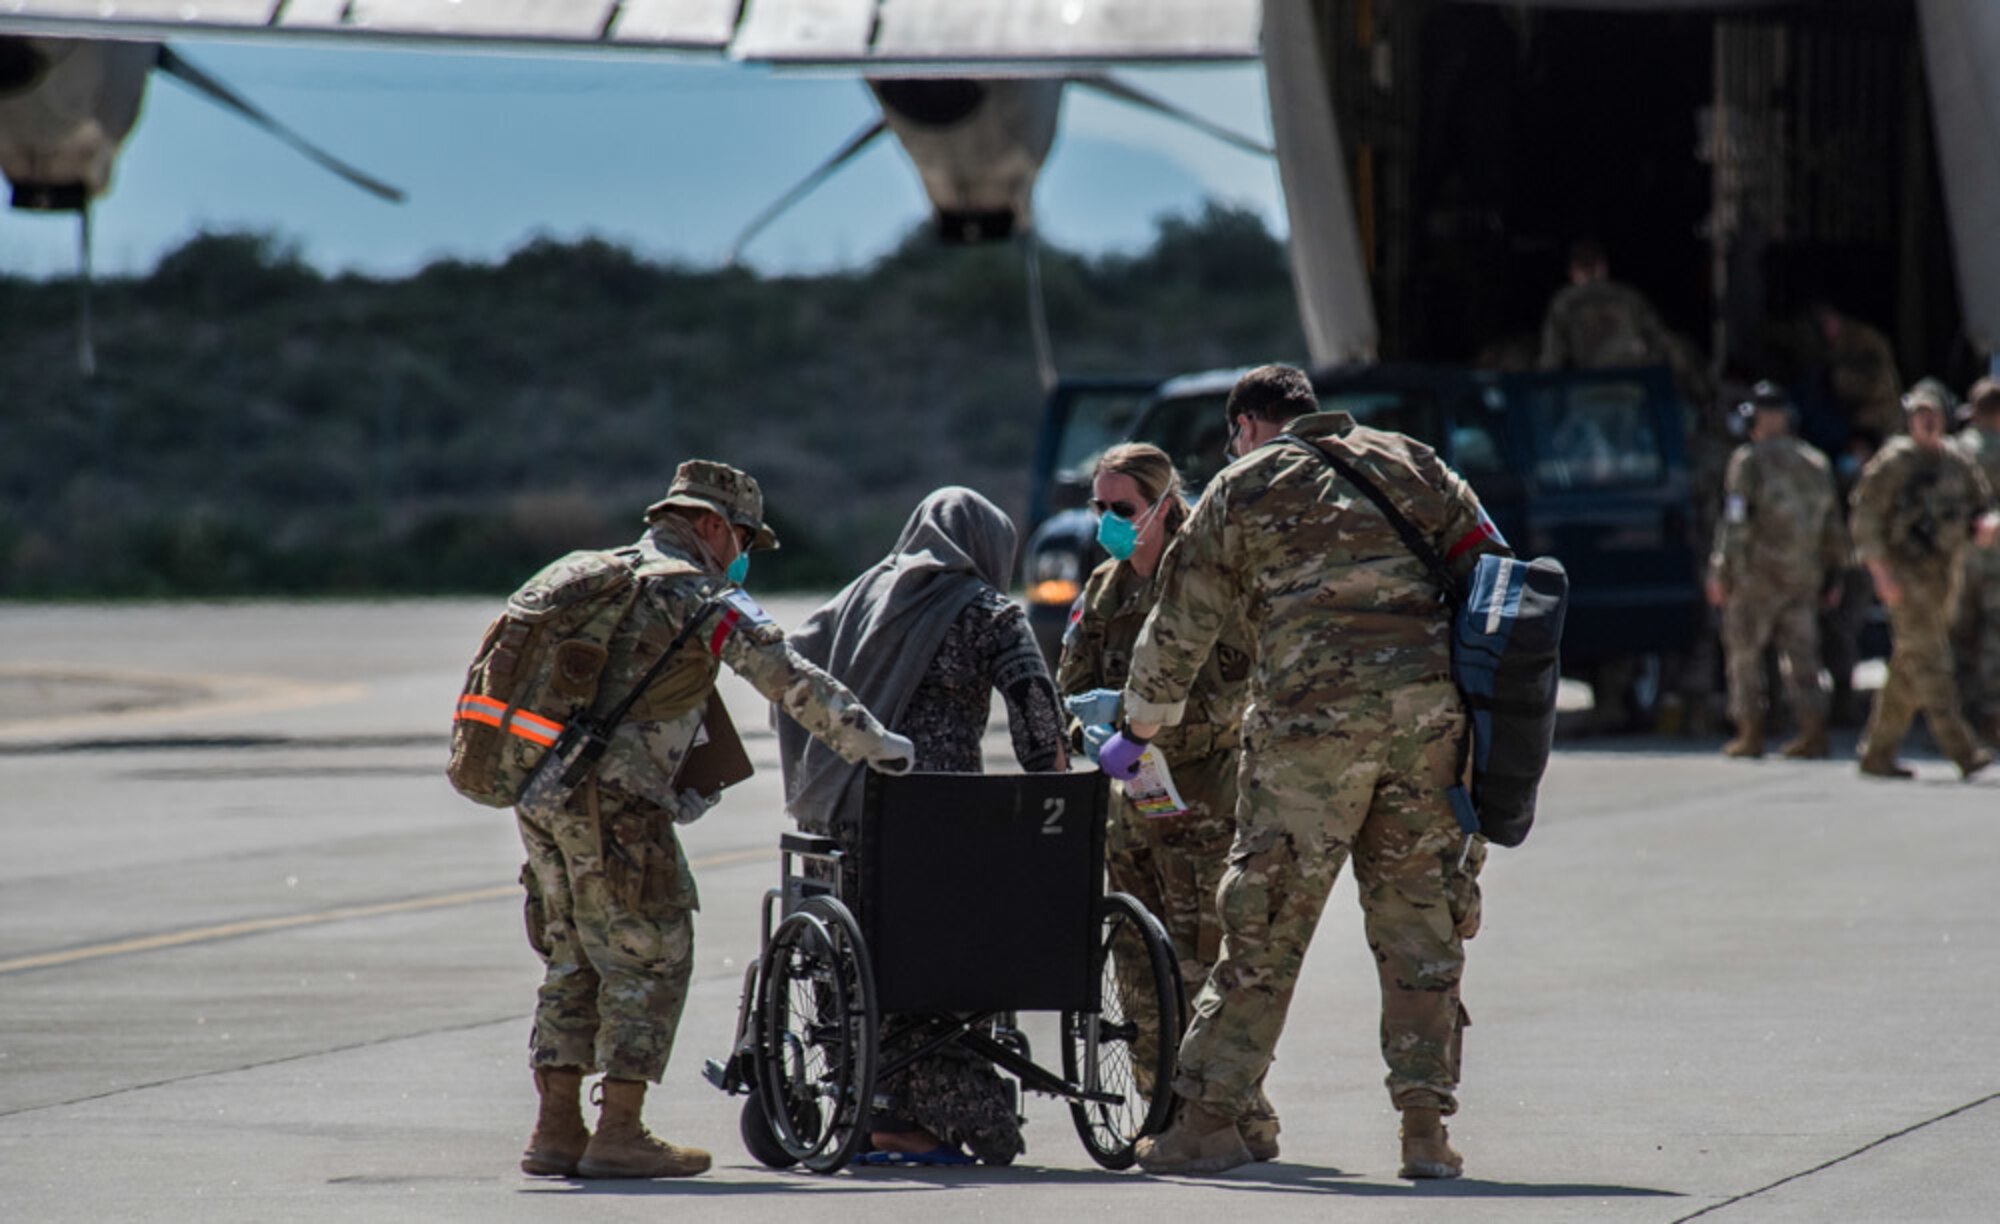 Airmen from Task Force-Holloman assist an Afghan evacuee into a wheelchair on the ramp at Holloman Air Force Base, New Mexico, Aug. 31, 2021. The Department of Defense, through U.S. Northern Command, and in support of the Department of State and Department of Homeland Security, is providing transportation, temporary housing, medical screening, and general support for up to 50,000 Afghan evacuees at suitable facilities, in permanent or temporary structures, as quickly as possible. This initiative provides Afghan evacuees essential support at secure locations outside Afghanistan. (U.S. Air Force photo by Staff Sgt. Kenneth Boyton)